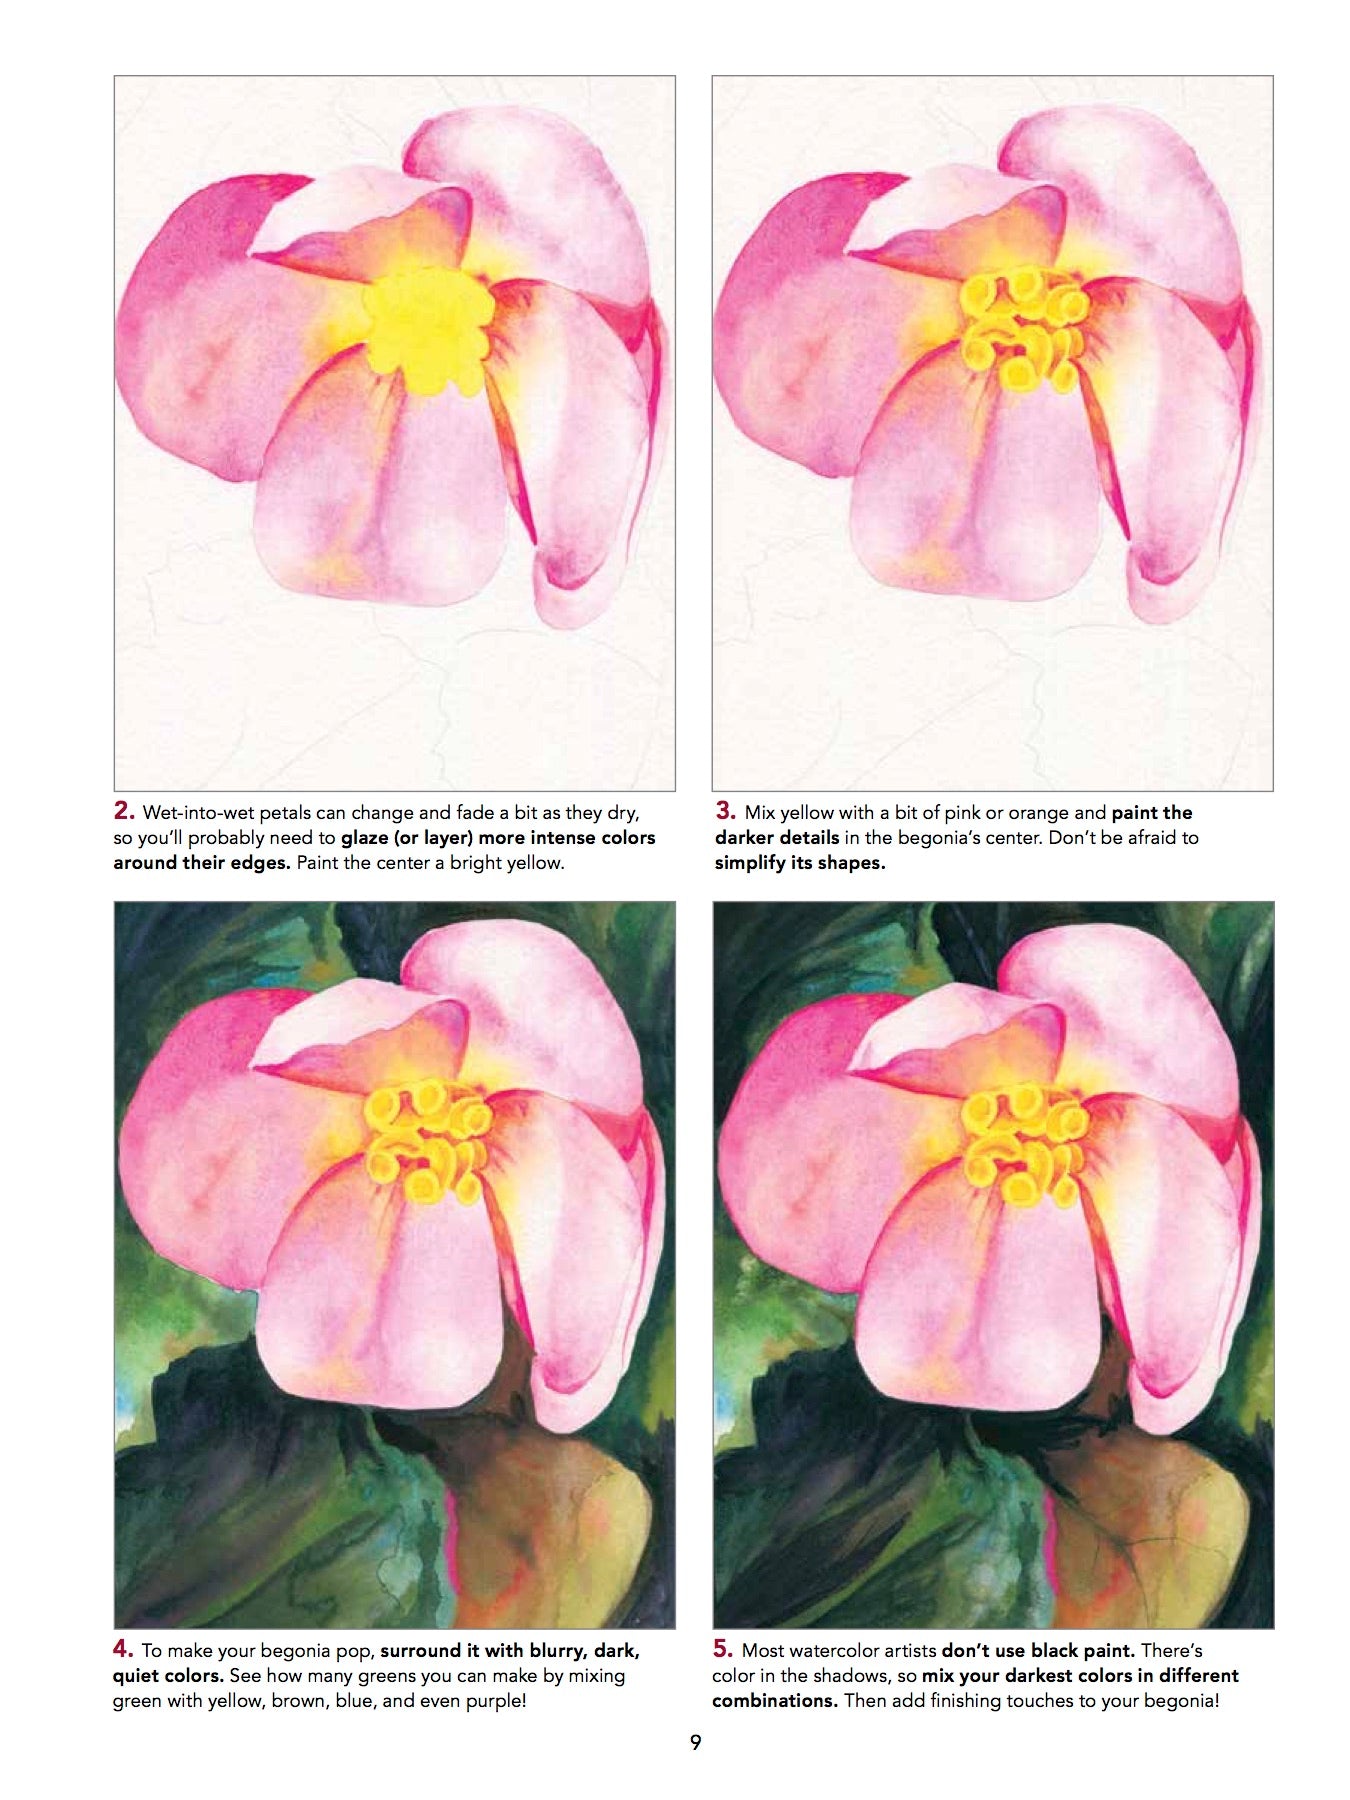 STRATH LEARN TO PAINT WATERCOLOR FLOWERS